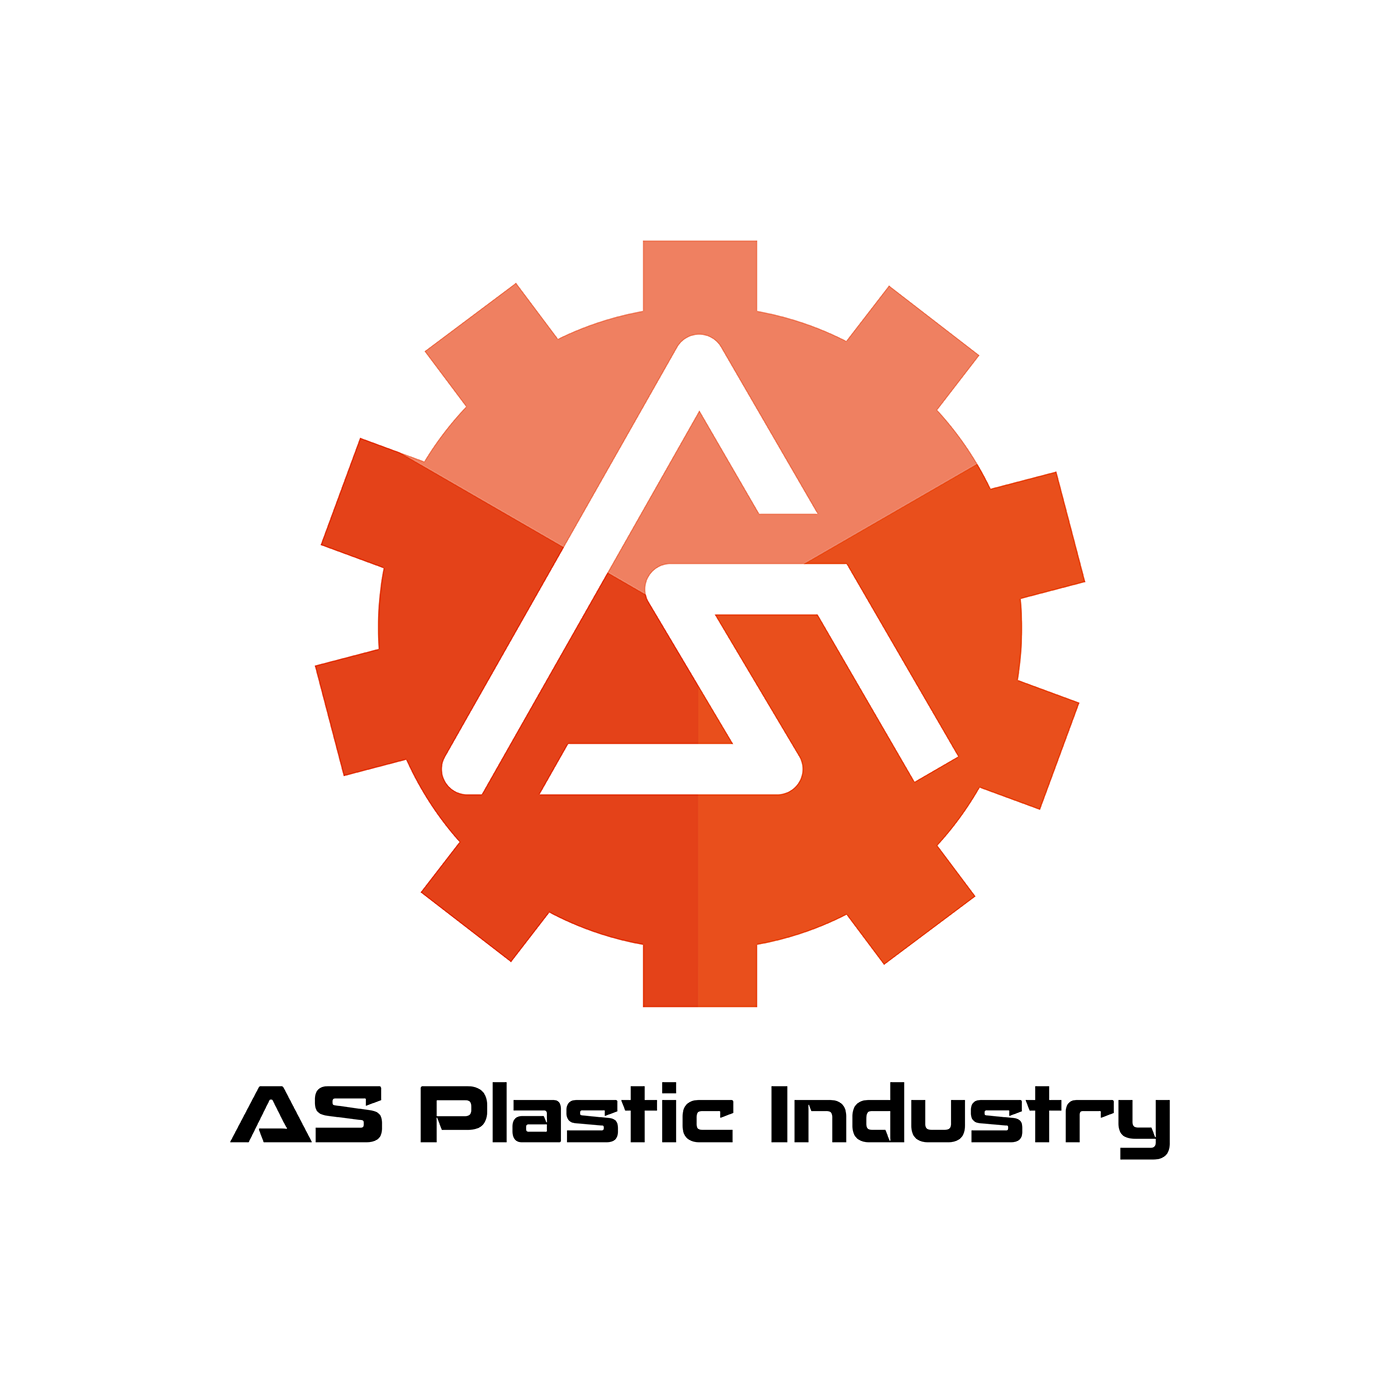 AS Plastic Industry logo, business stationery and social media design by Mohsin Fiaz